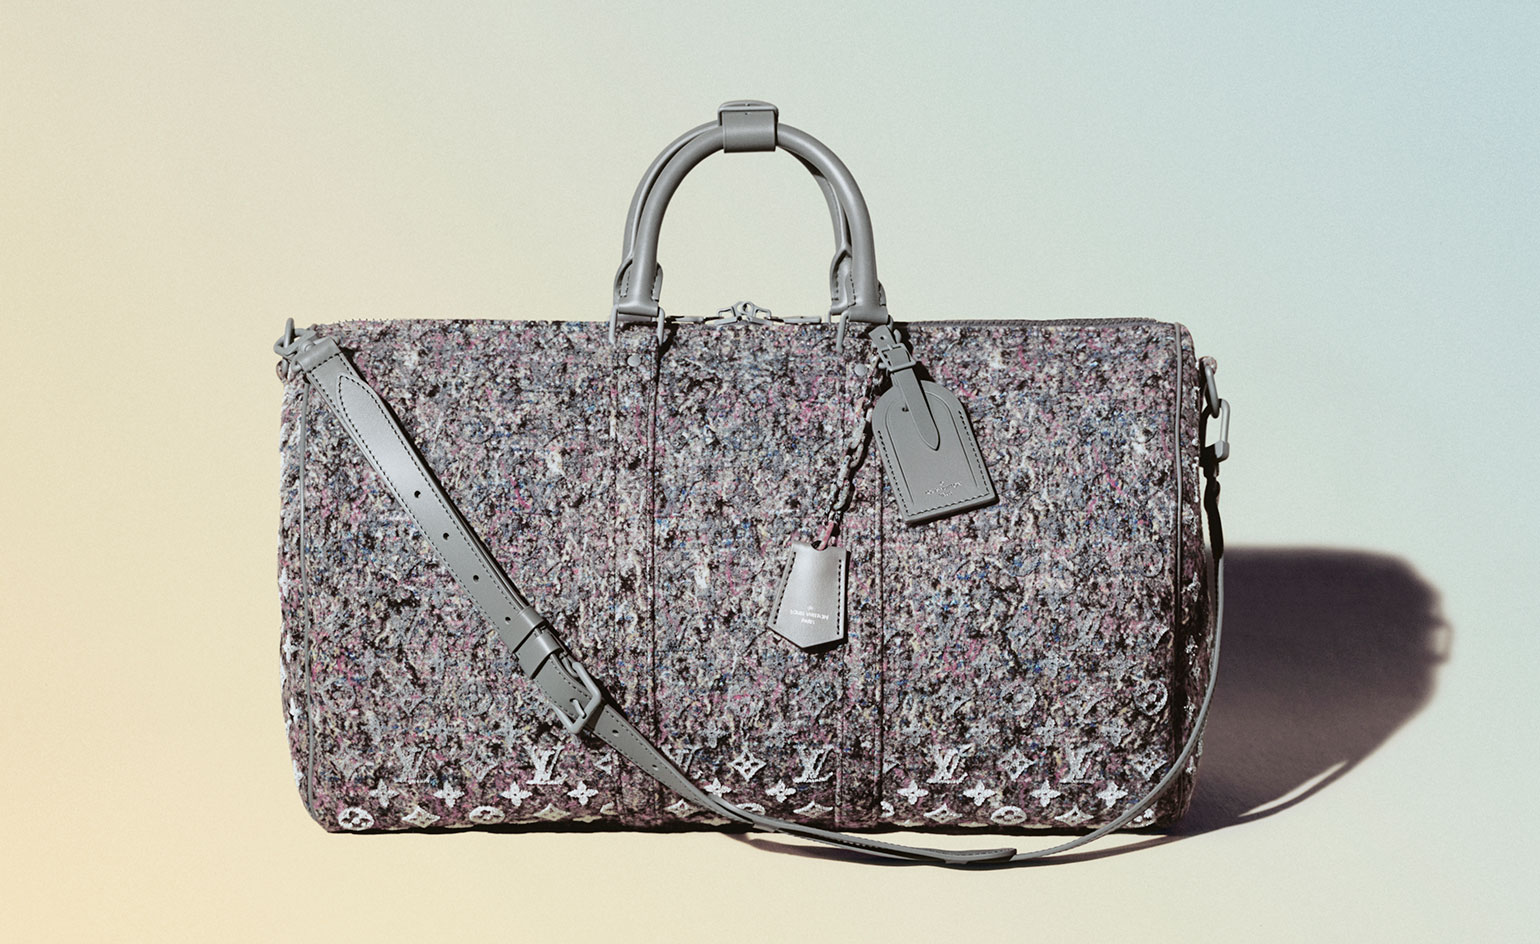 Louis Vuitton Felt Line: bags to boost sustainable shopping